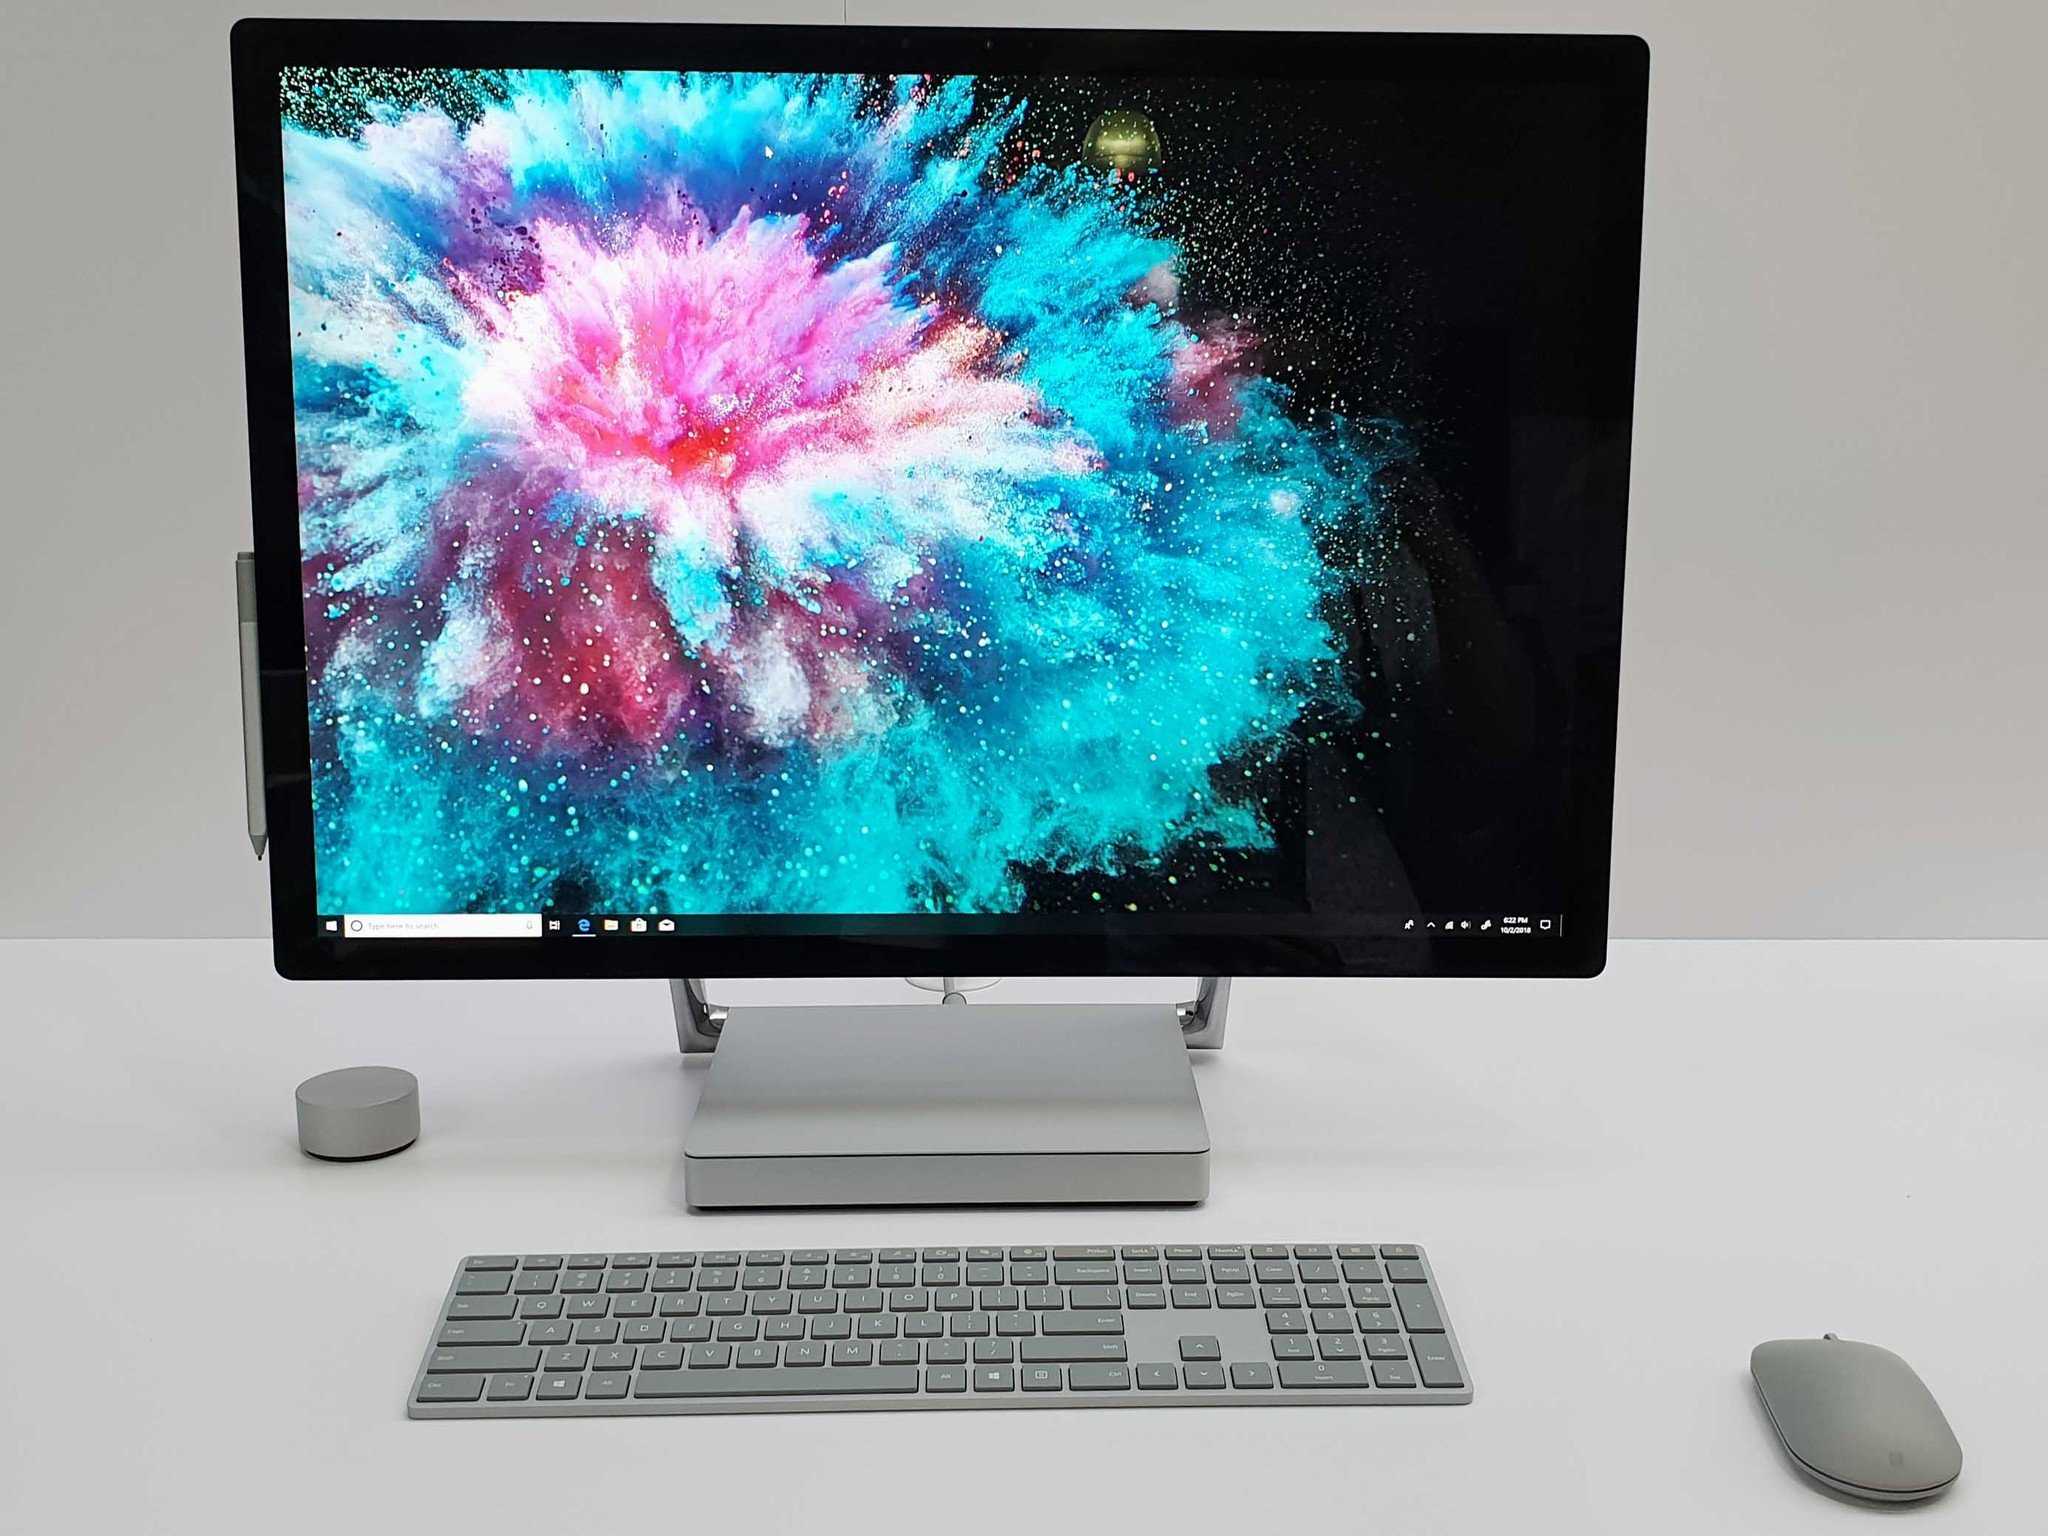 Surface Studio 2 now available starting at $3,500